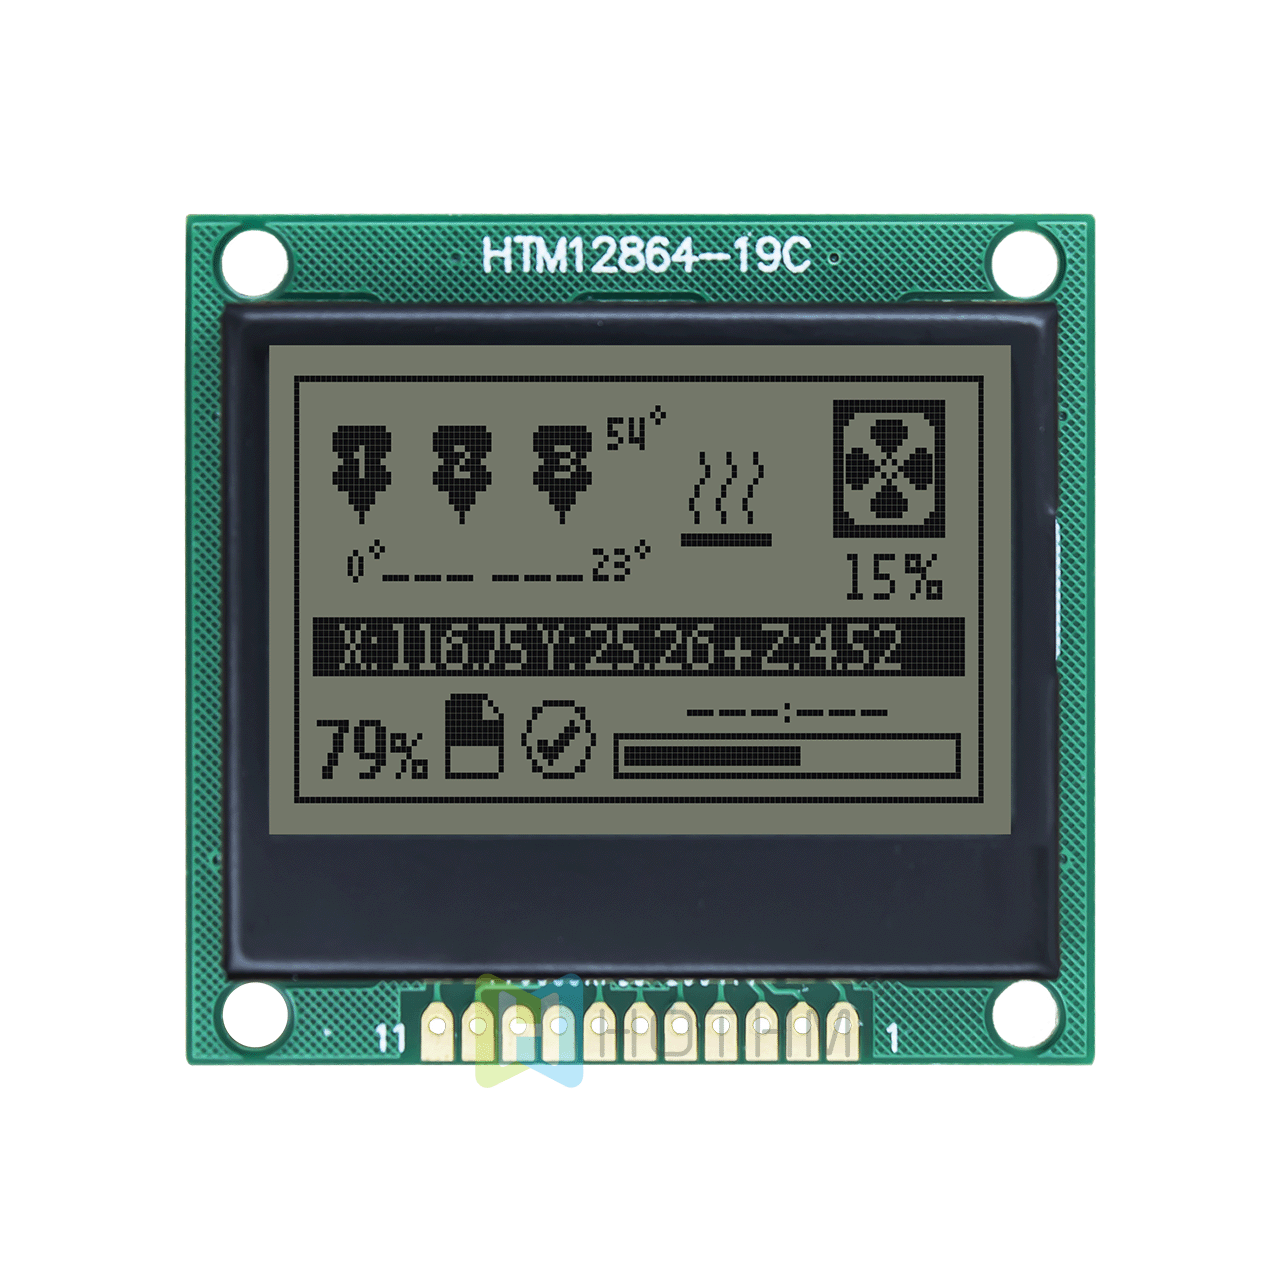 1.7-inch 128 x 64 LCD graphic display | FSTN positive display gray text on white background | SPI interface